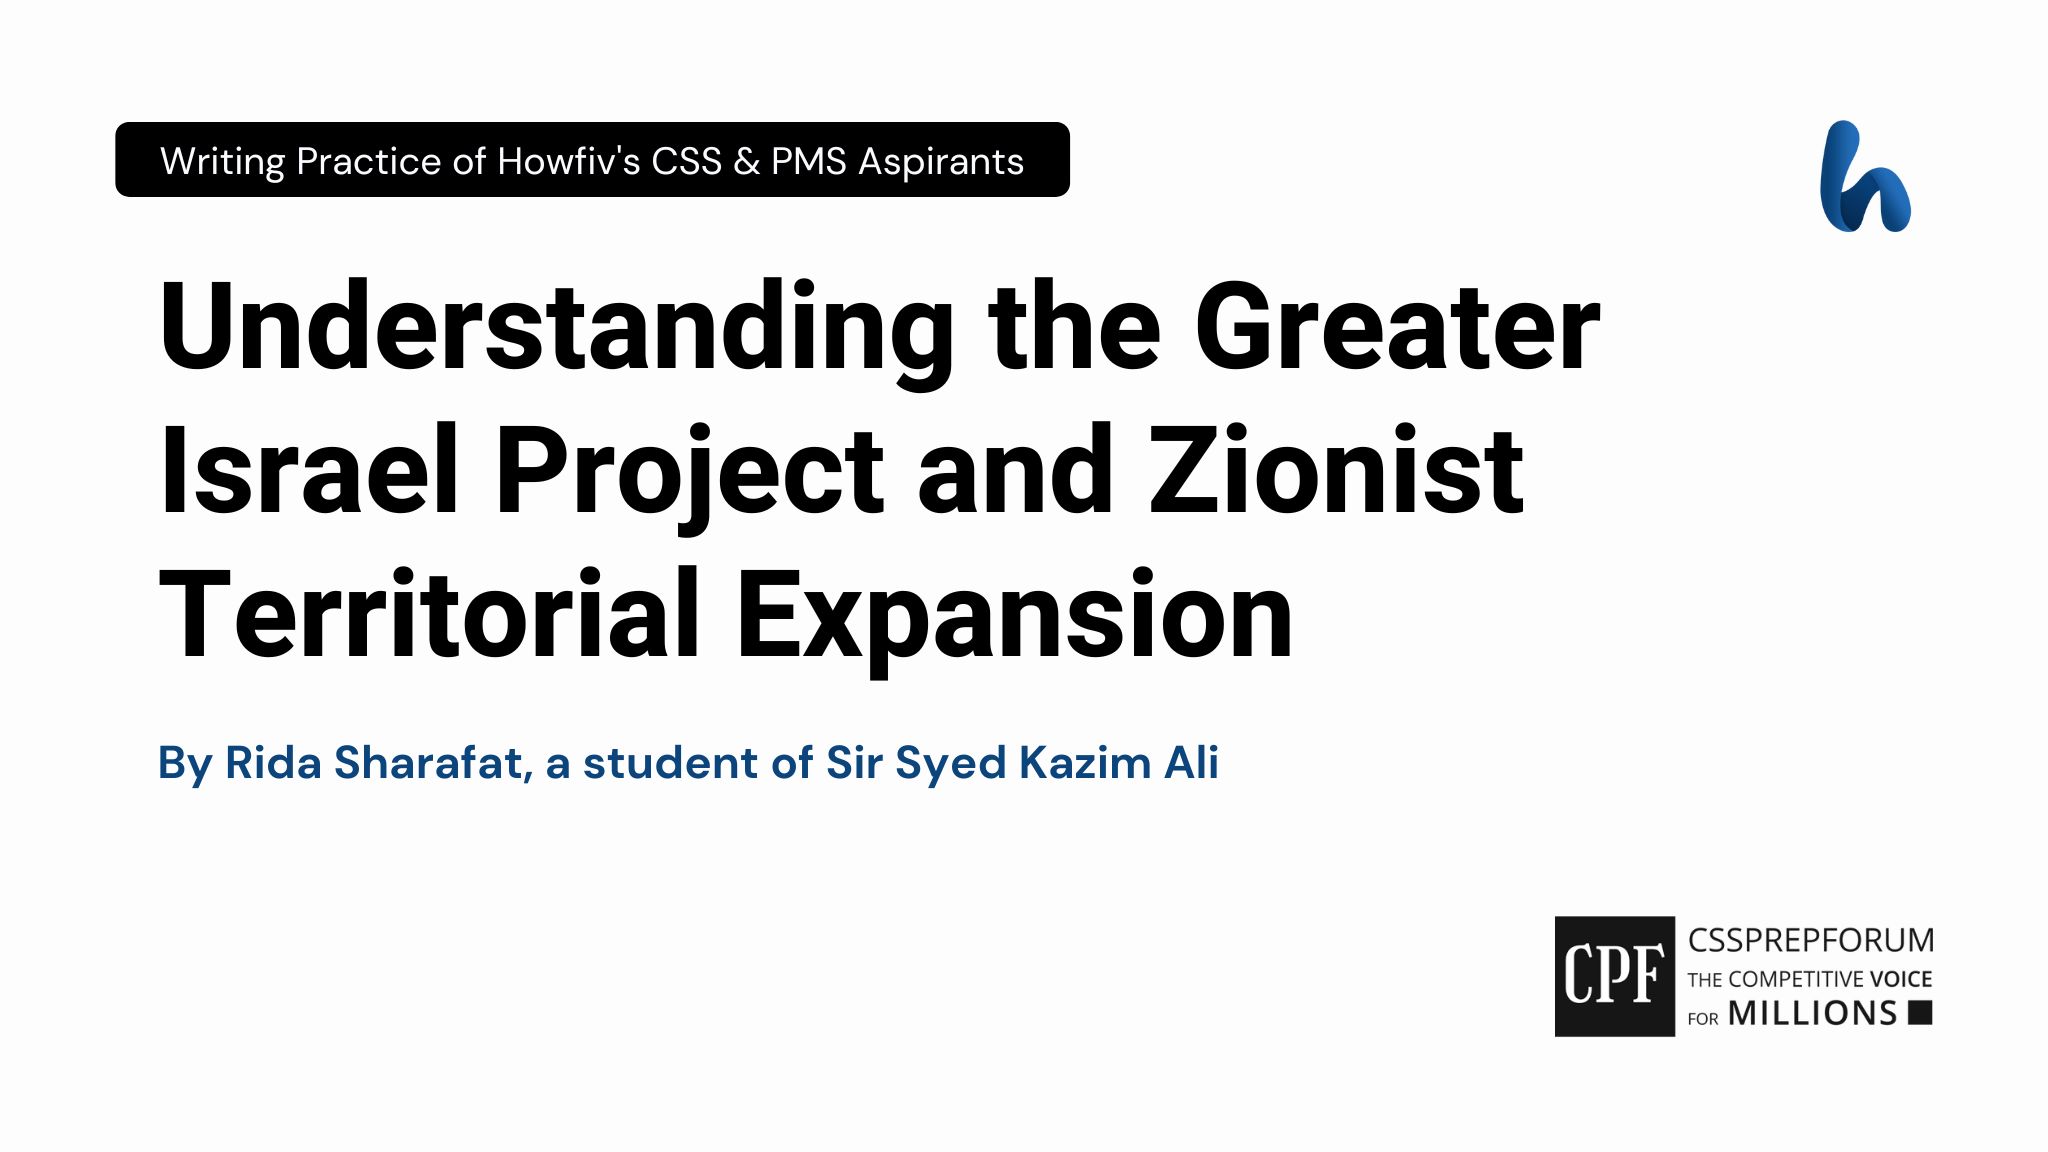 Understanding the Greater Israel Project and Zionist Territorial Expansion